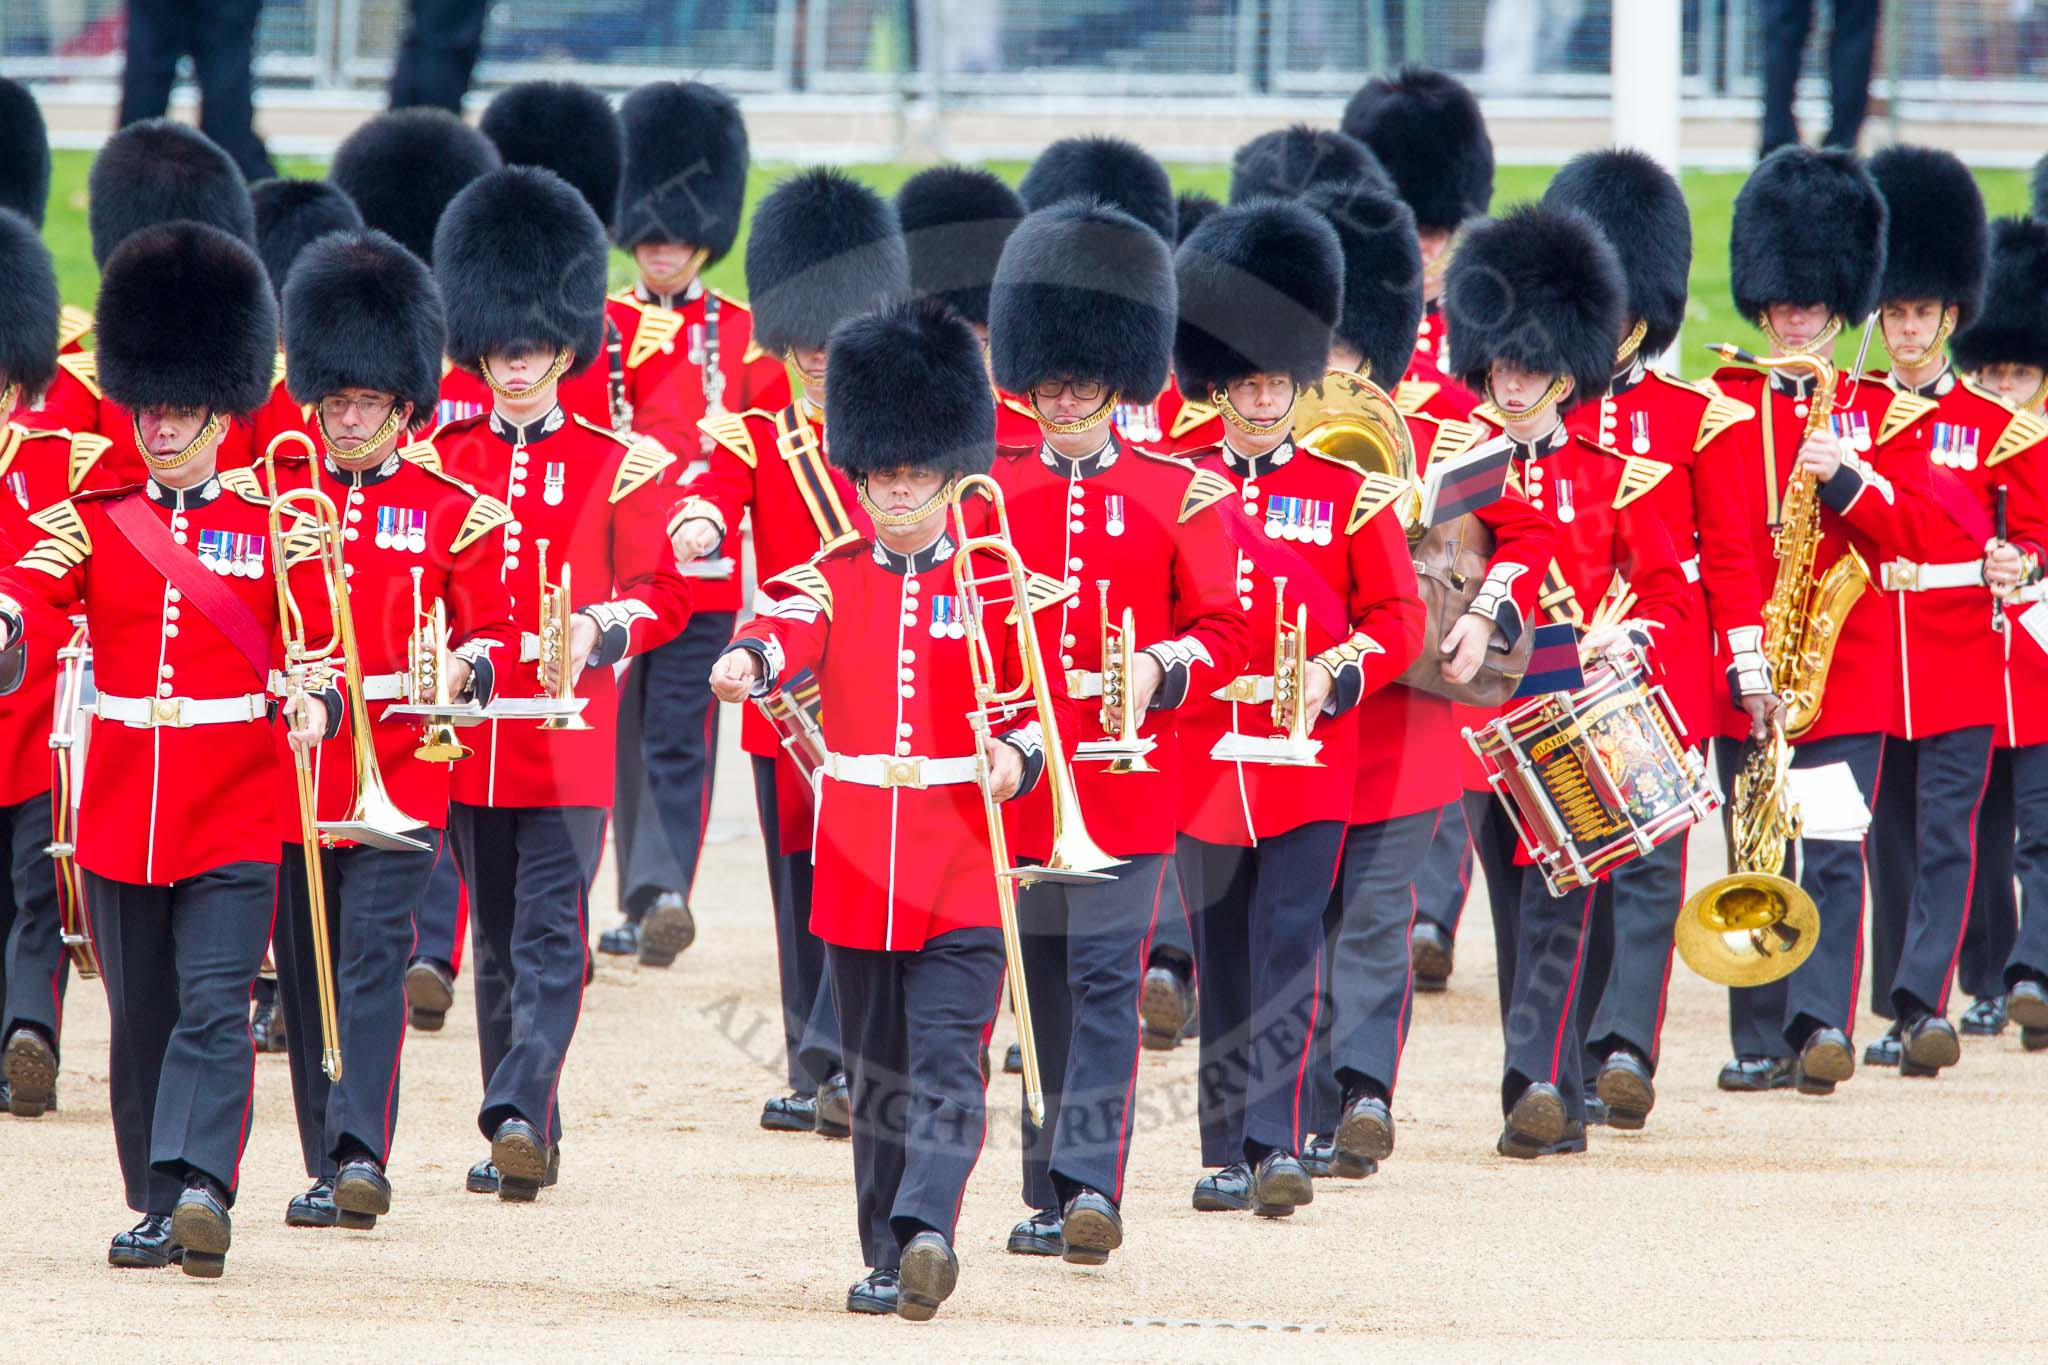 Trooping the Colour 2014.
Horse Guards Parade, Westminster,
London SW1A,

United Kingdom,
on 14 June 2014 at 10:25, image #134